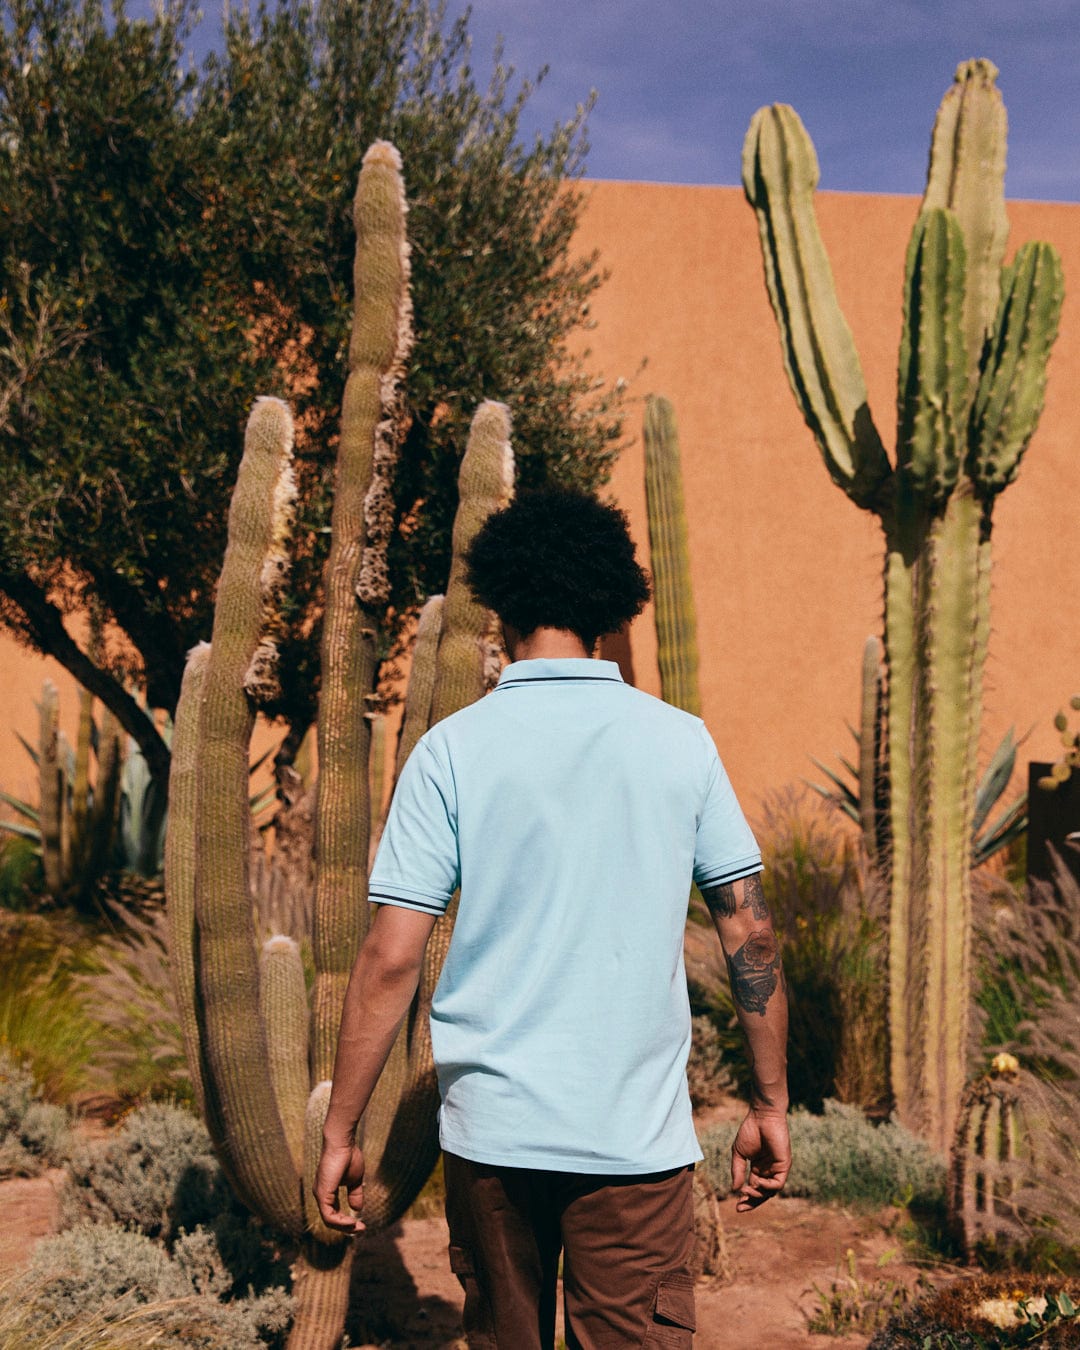 A person with curly hair, wearing a Strike Logo - Mens Short Sleeve Polo Shirt - Light Blue adorned with a Saltrock embroidered logo and brown pants, faces away, standing next to tall cacti in an arid garden.